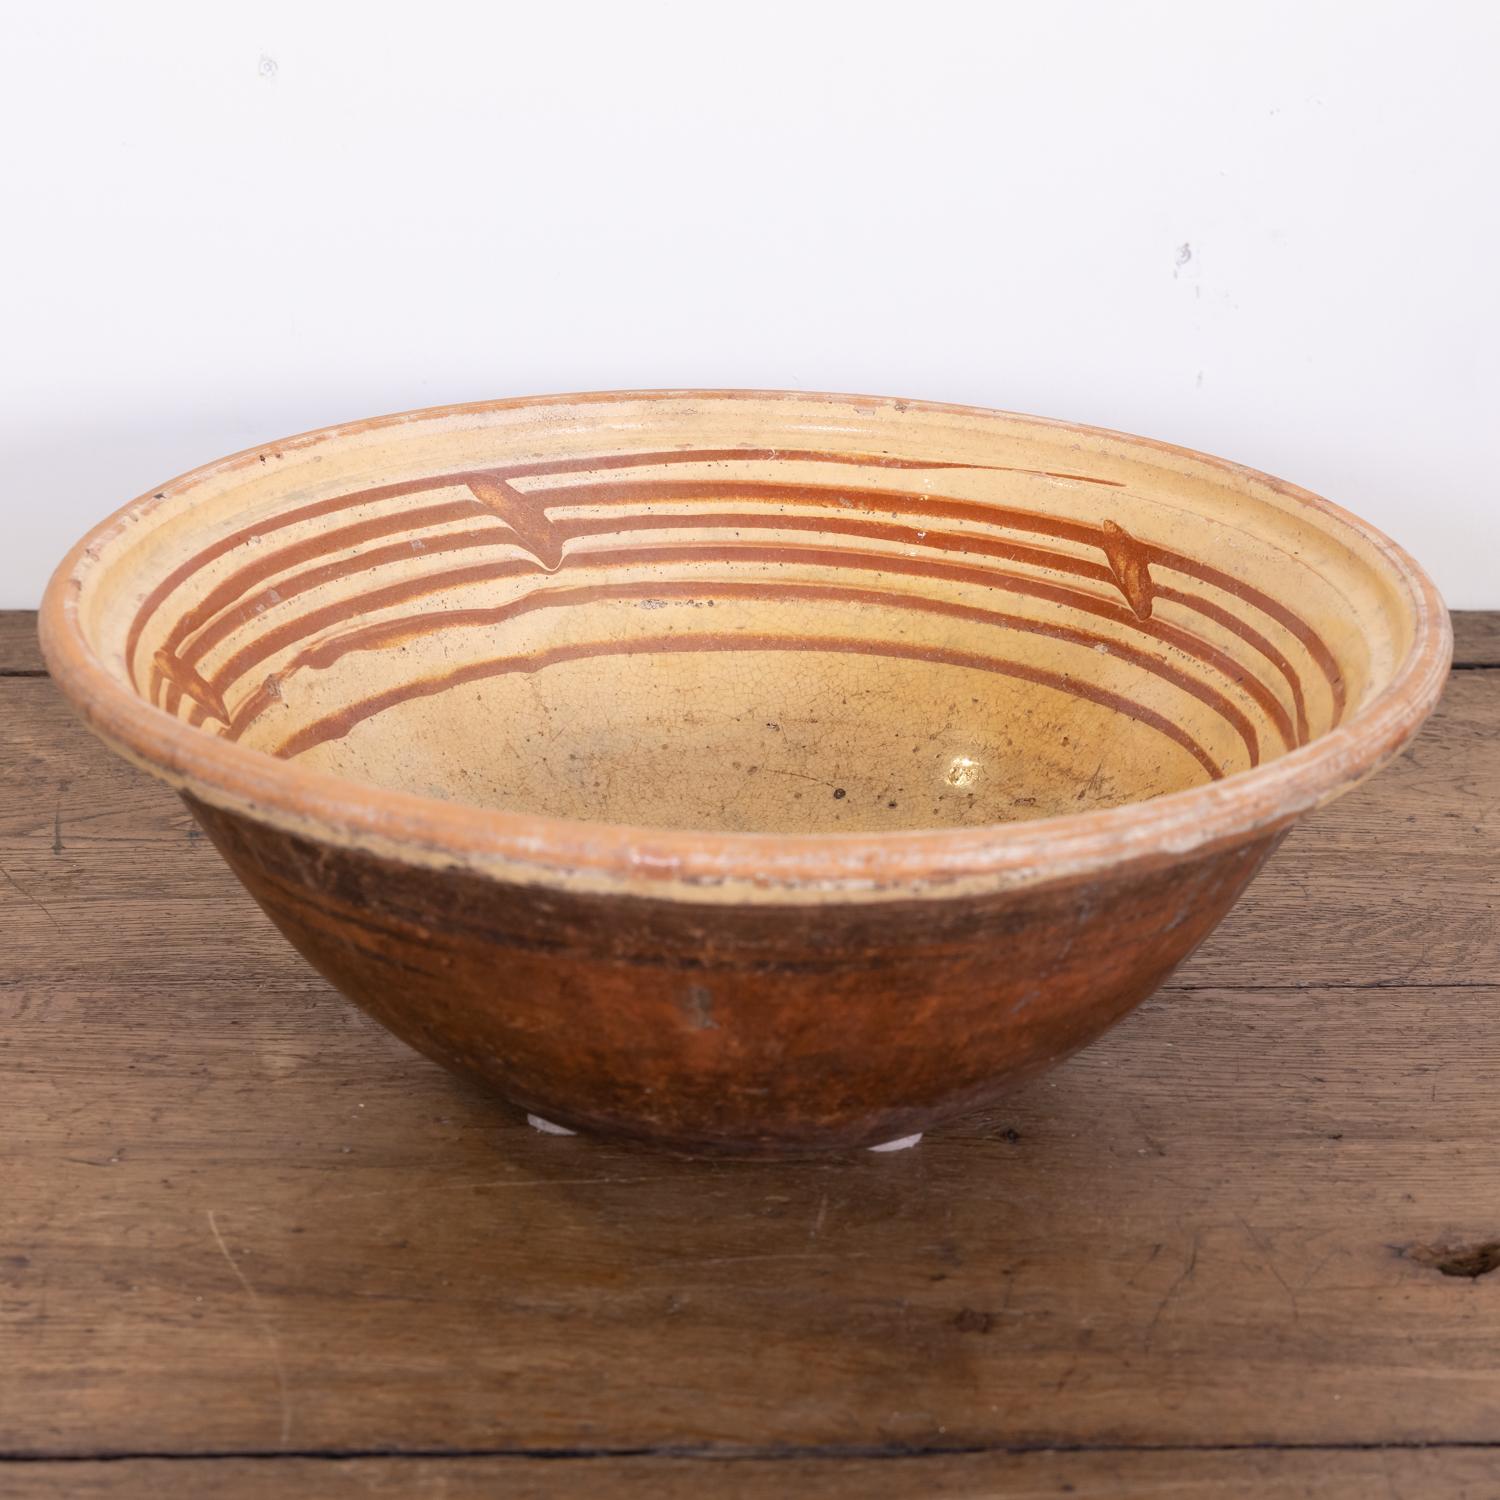 A late 19th century French pancheon or dough bowl having an unglazed reddish terracotta exterior with a light mustard yellow glaze and caramel splatters to the interior, circa 1890s. Pancheons were multipurpose French kitchen bowls used during the